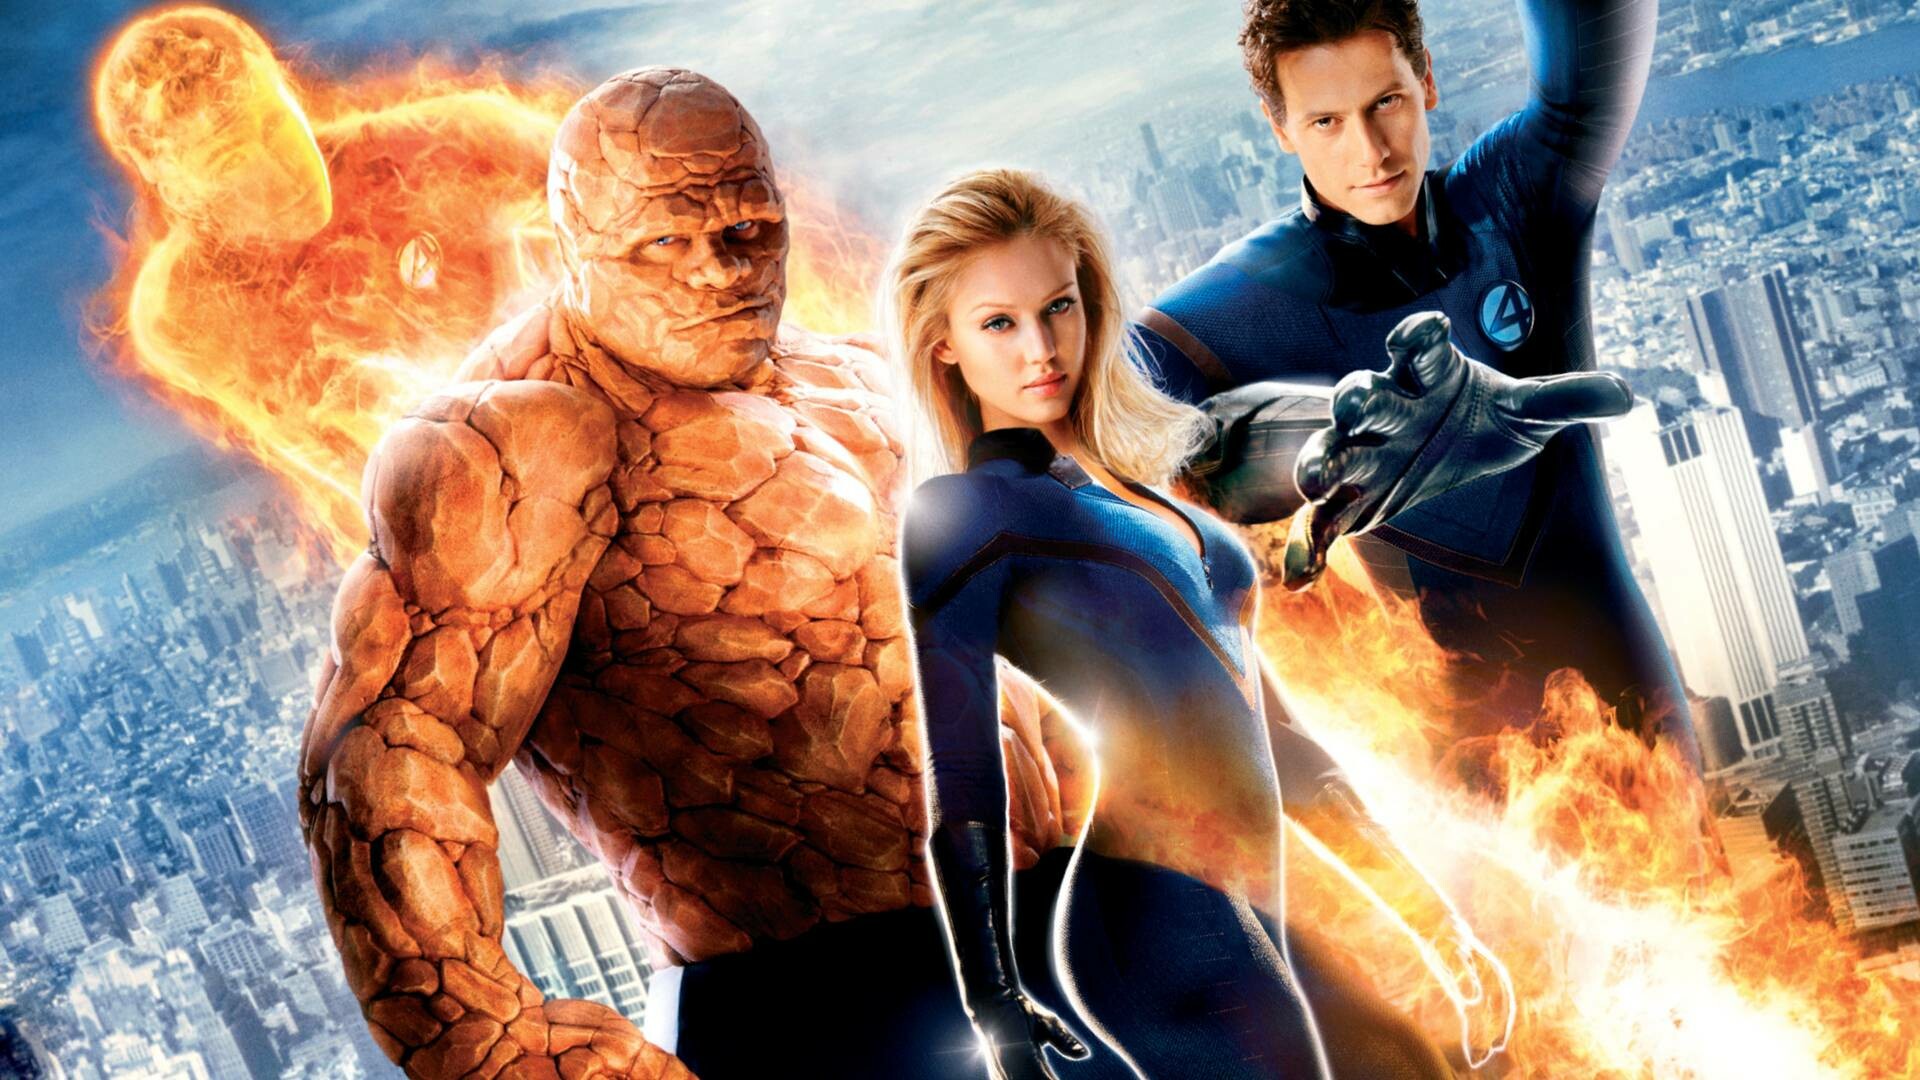 Fantastic 4: The Thing, the Human Torch, the Invisible Woman and Mister Fantastic. 1920x1080 Full HD Background.